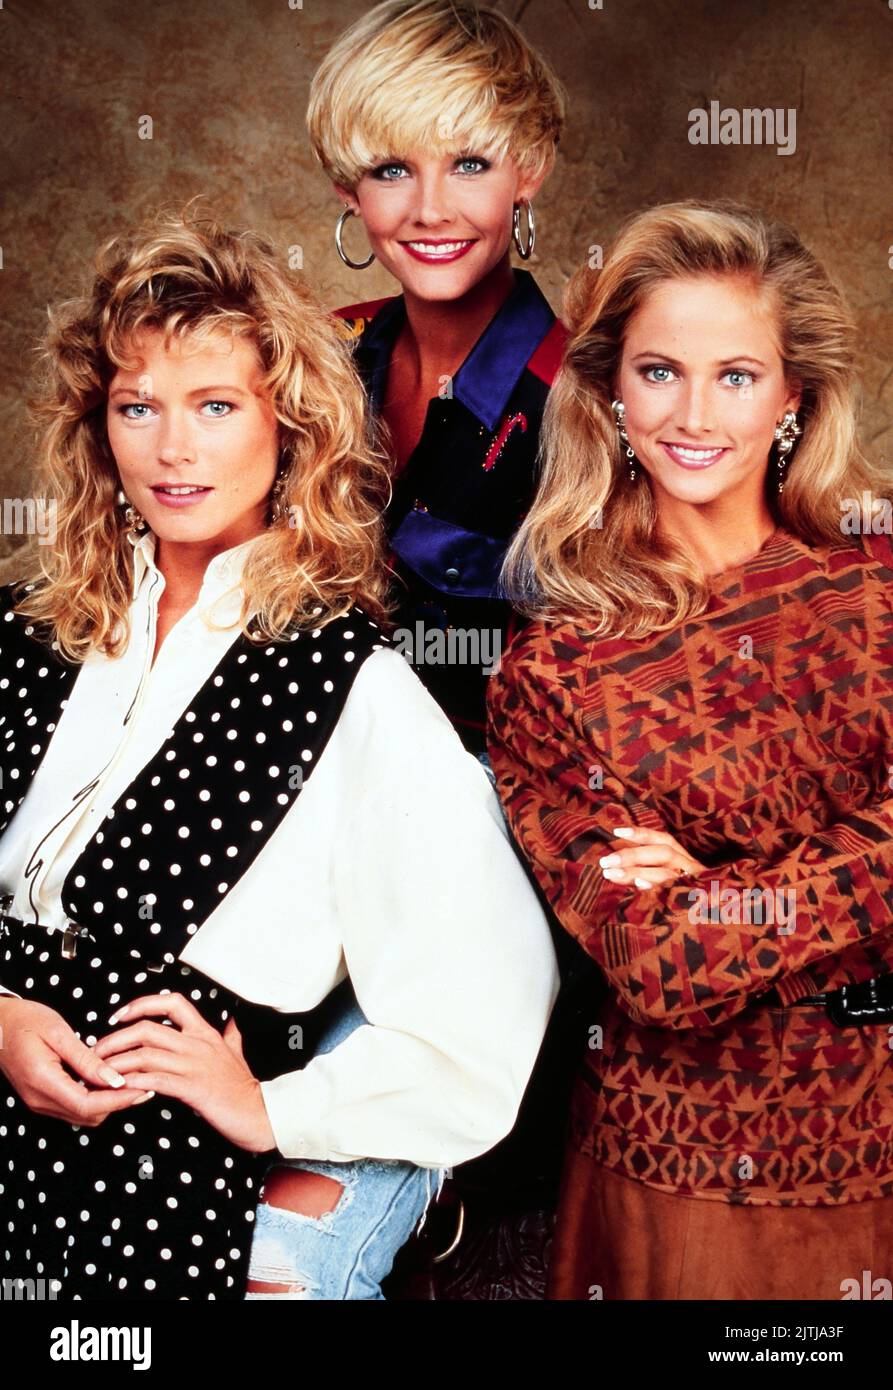 Dallas, Fernsehserie, USA 1978 - 1991, Darsteller: Sheree J. Wilson, Kimberly Foster, Cathy Podewell Stock Photo